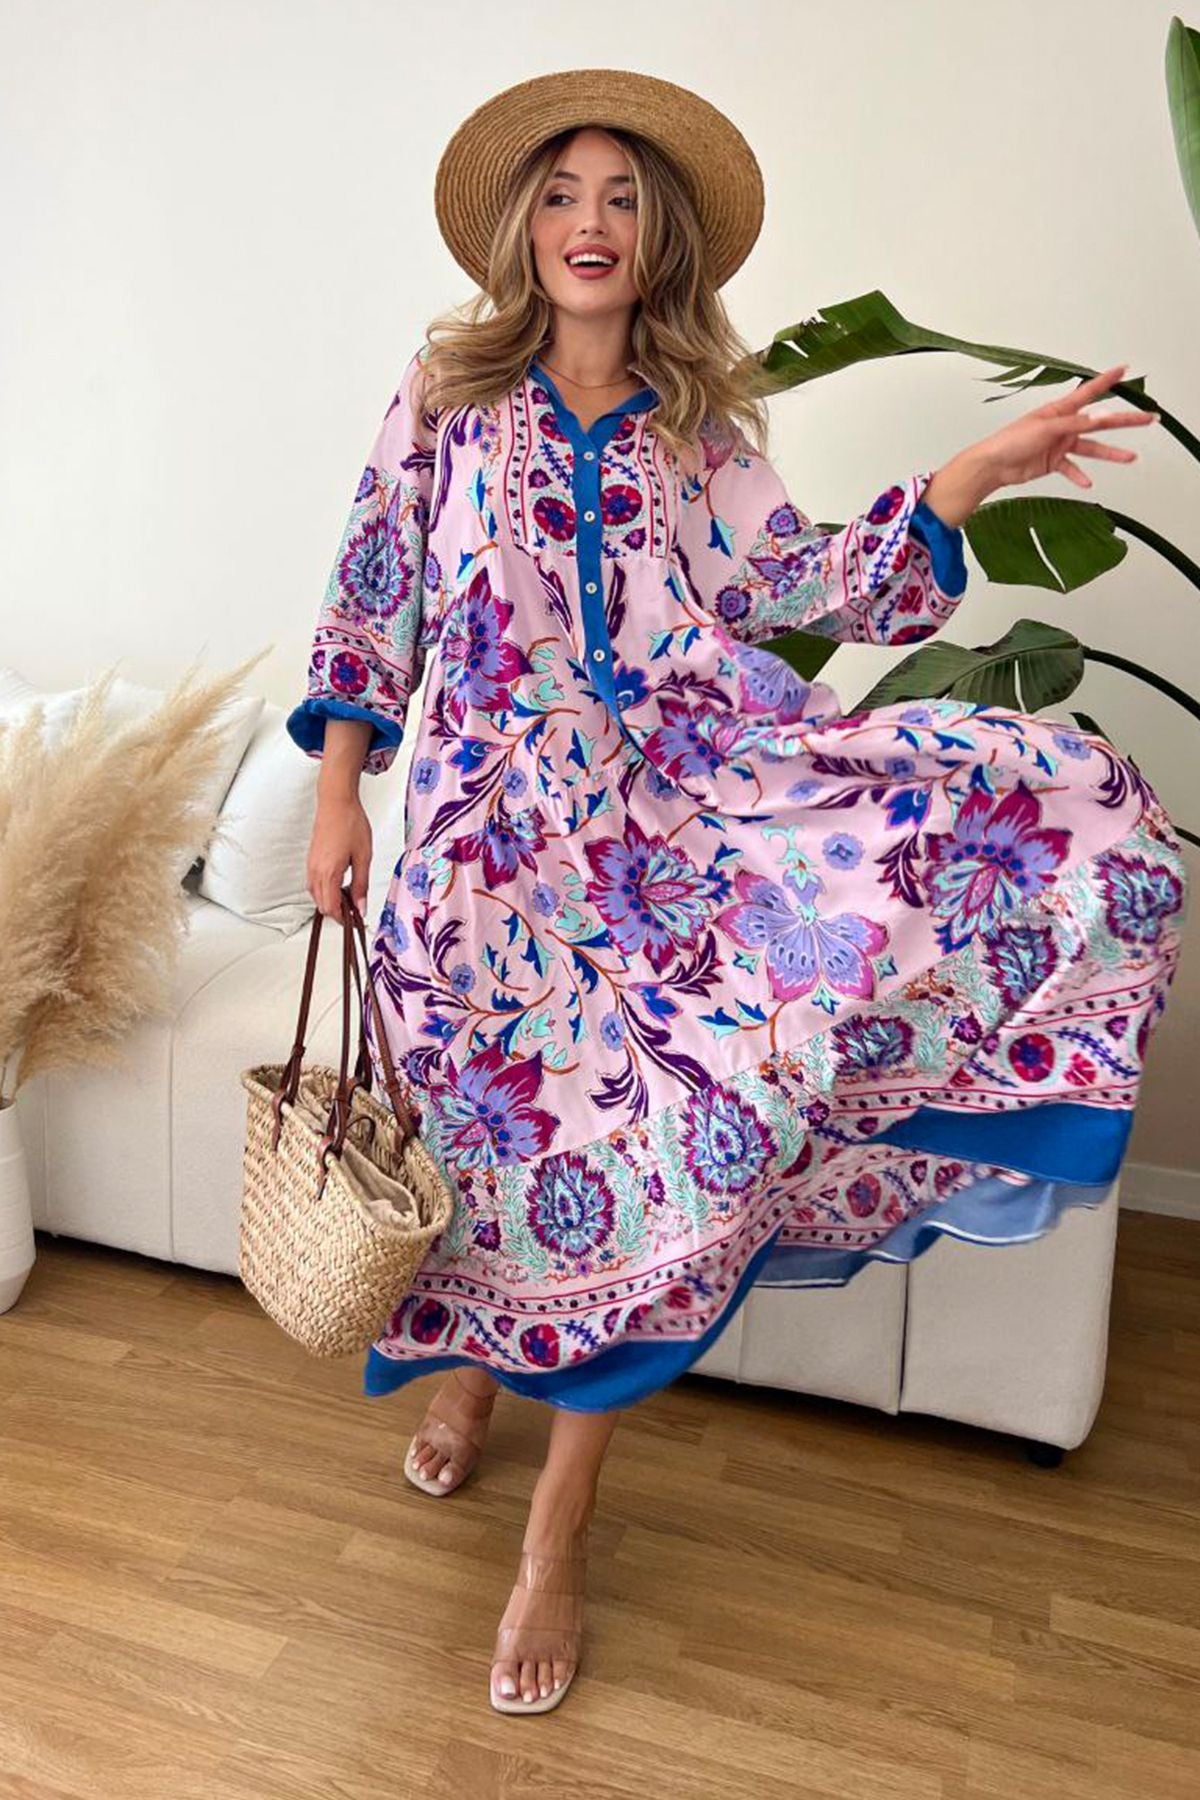 Rose flower lightweight cotton dress! Perfect for sunny strolls and outdoor adventures, its relaxed silhouette and breathable fabric keep you cool and stylish all day long